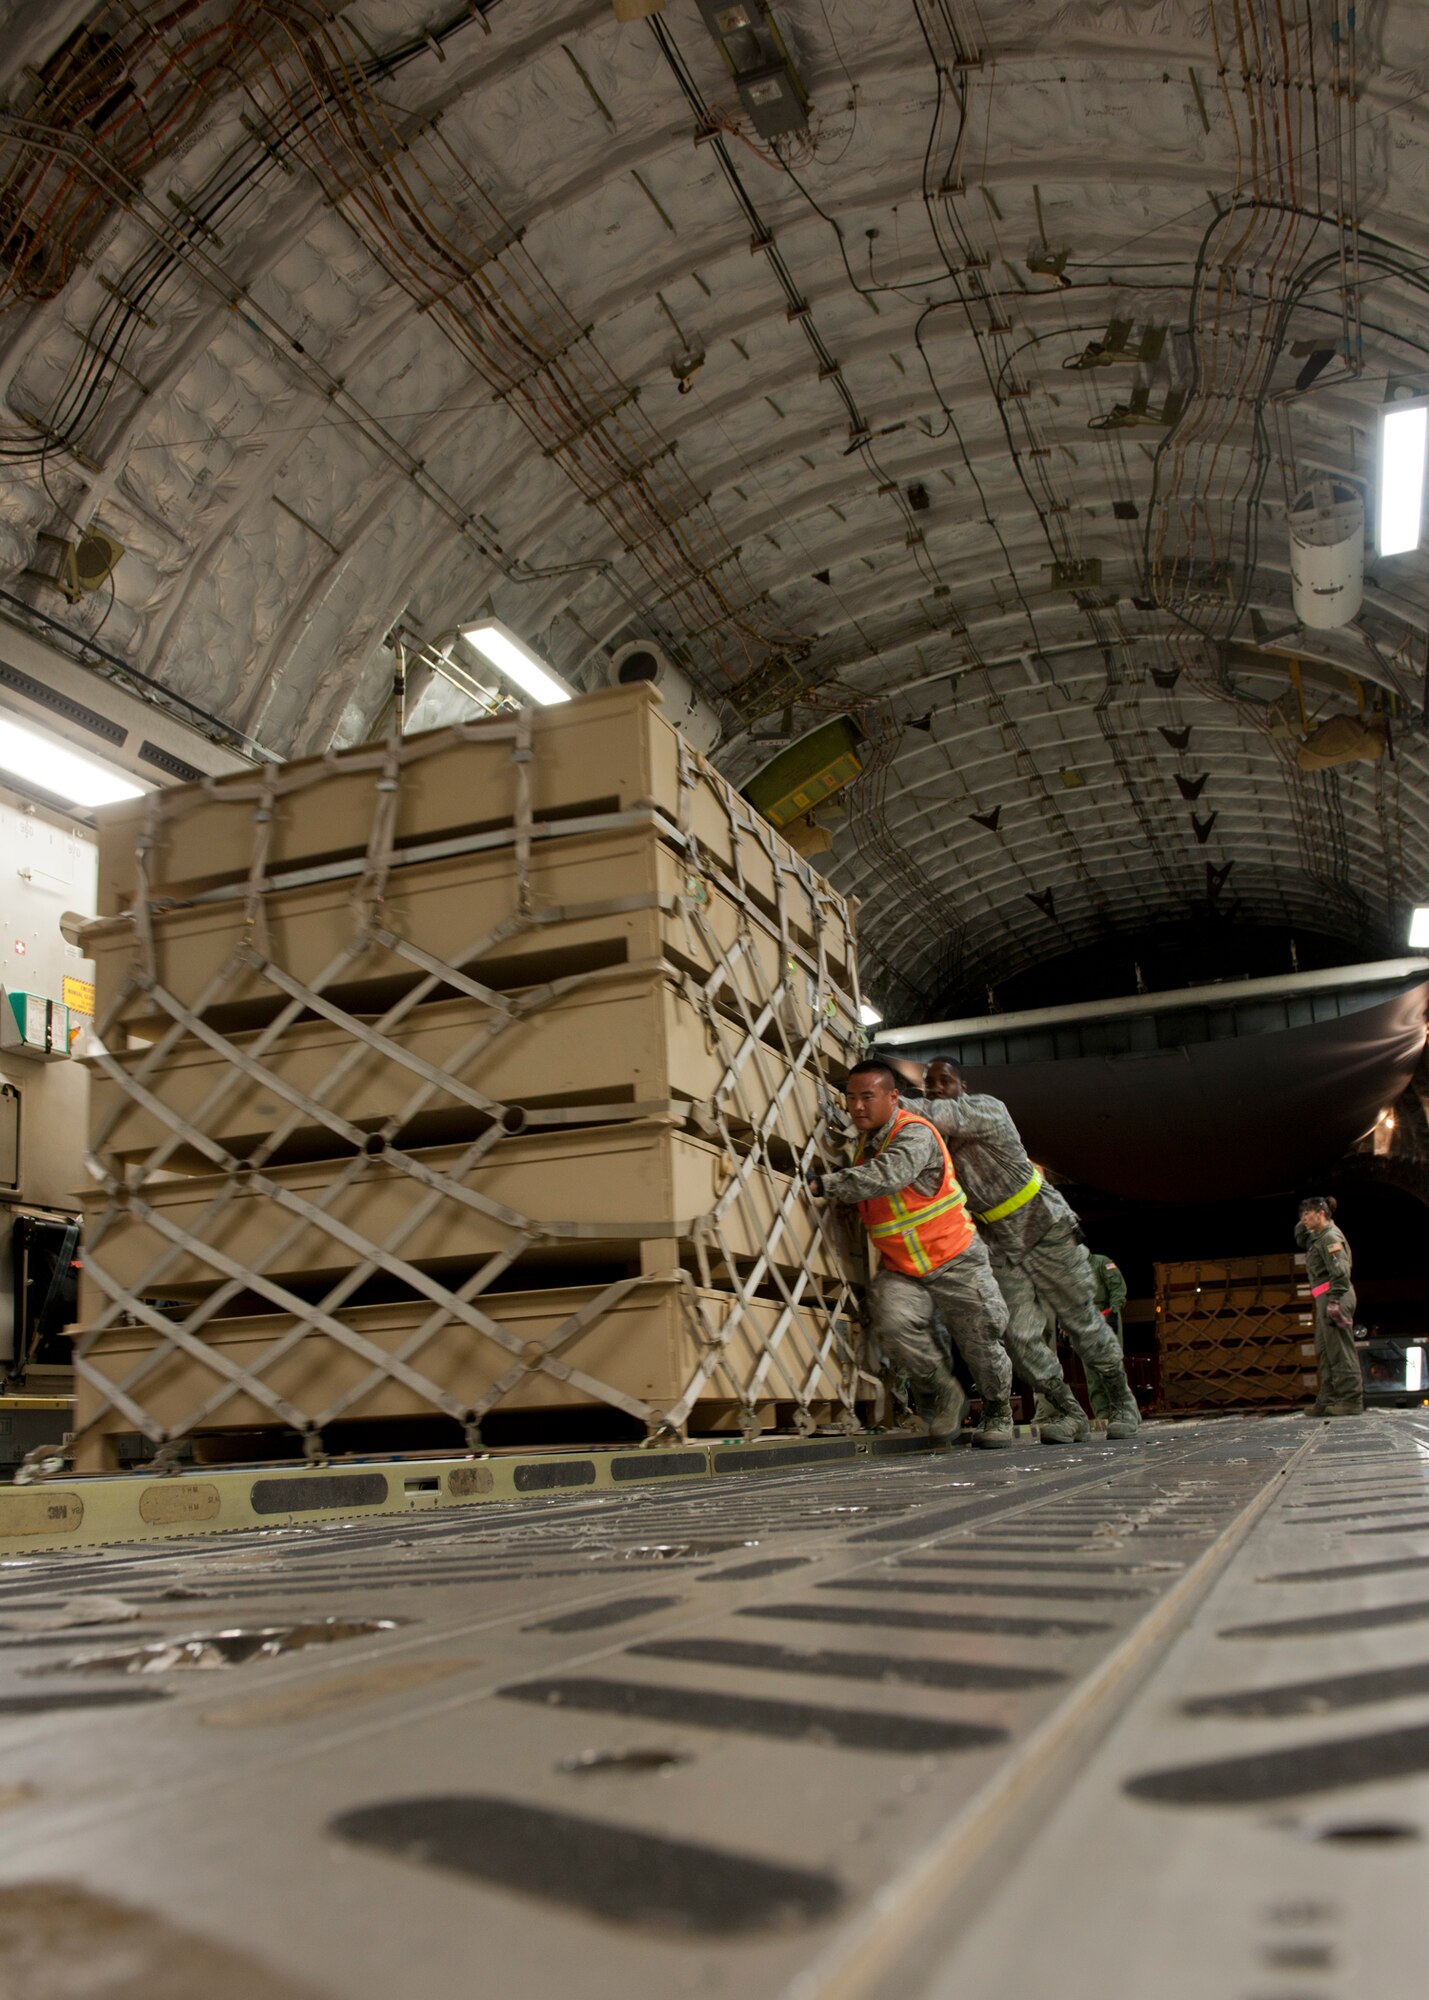 Personnel from the 49th Materiel Maintenance Squadron and the 89th Airlift Squadron load cargo onto a C-17 Globemaster III at Holloman Air Force Base, N.M., Nov. 2. The C-17 was here to pick up cargo that was packed by the 49th MMS. The 49th MMS was tasked with supporting the humanitarian relief efforts for the victims of Hurricane Sandy. In response to the tasking, the 49th MMS worked for 15 straight hours preparing more than 58,000 pounds of cargo spread across eight pallets. The cargo consisted of two water pumps capable of pumping 400 gallons of water per minute, 12,000 feet of hose, and two containers of system support items.  (U.S. Air Force photo by Senior Airman DeAndre Curtiss/Released)